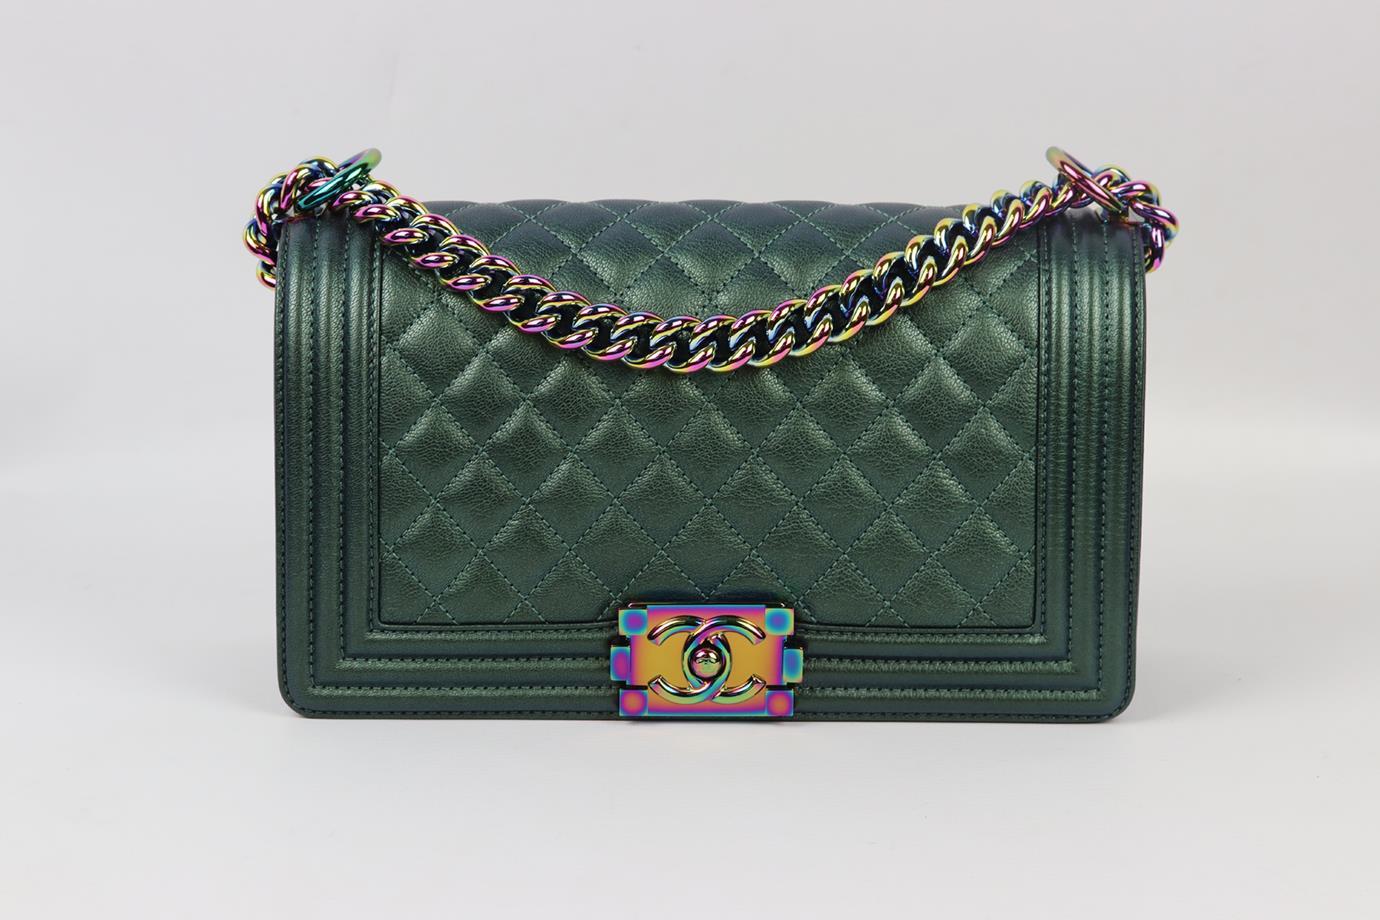 Chanel 2016 Boy medium iridescent quilted leather shoulder bag. Made from iridescent green quilted leather with matching leather interior and rainbow hardware chain shoulder straps. Green. Push lock fastening at front. Comes with authenticity card.